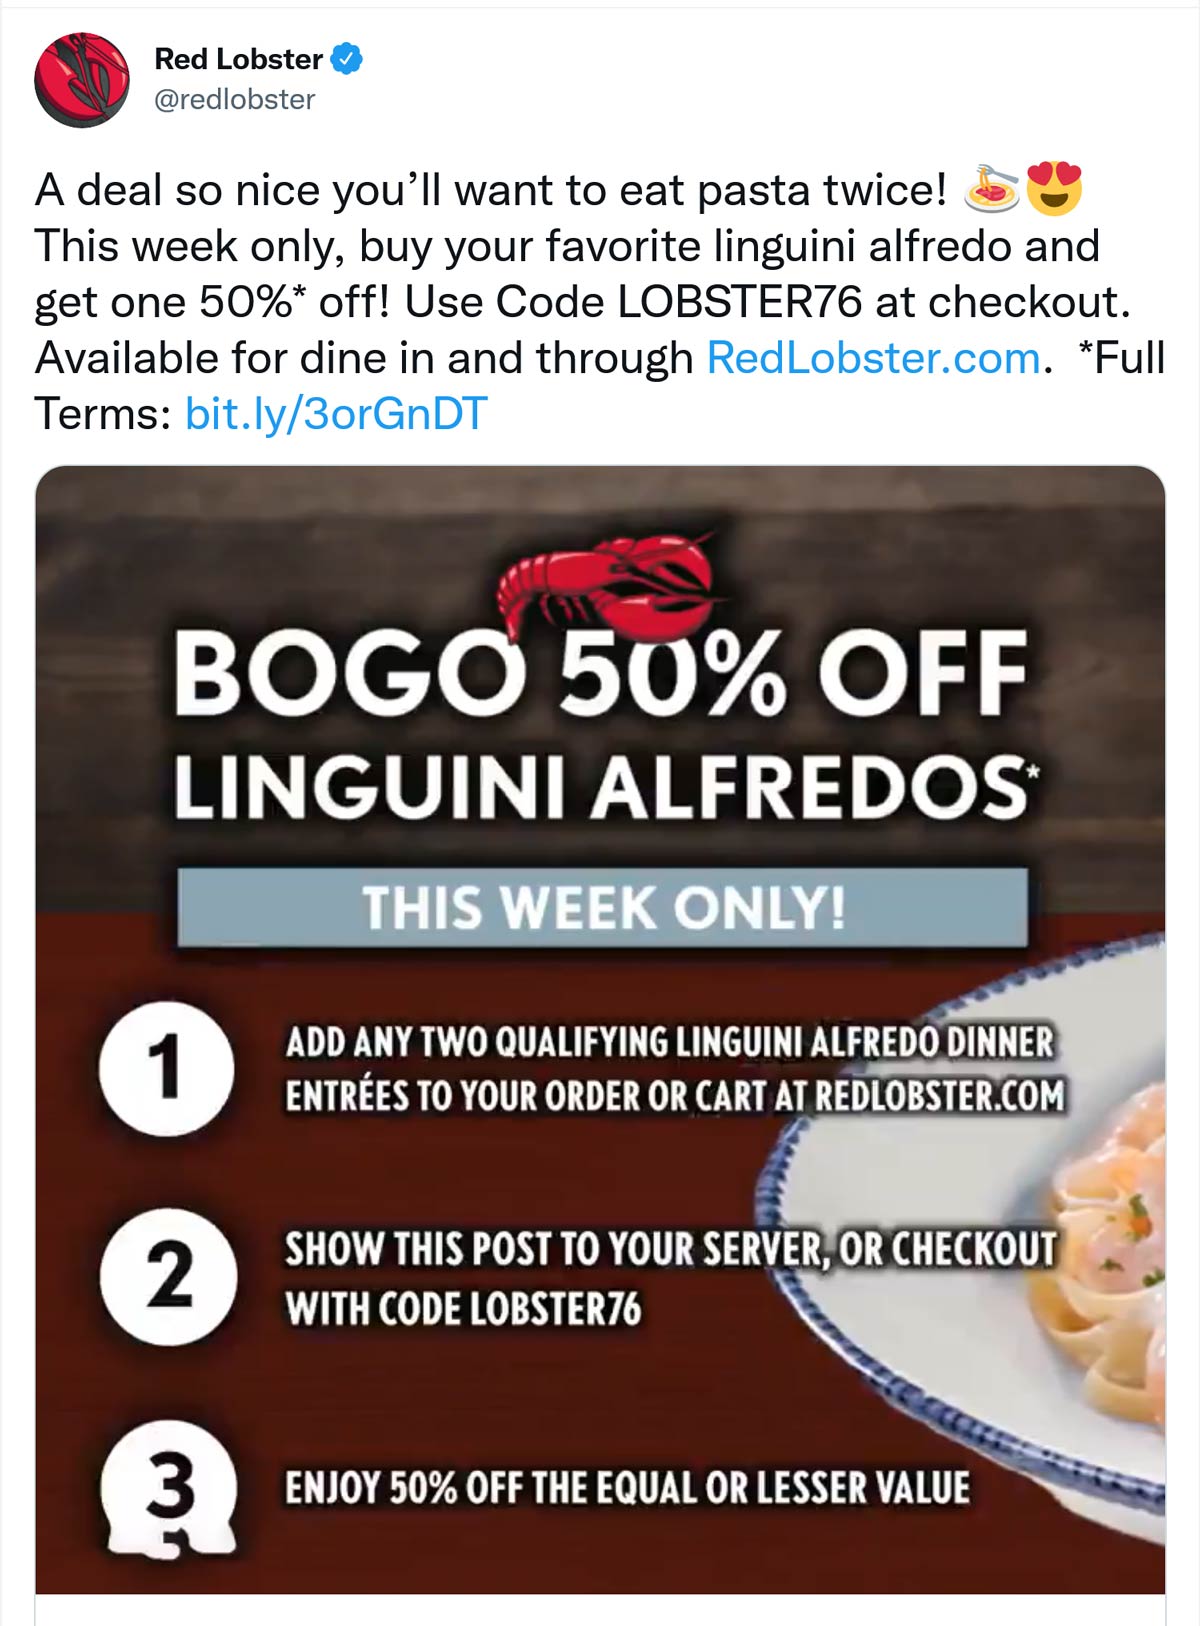 Red Lobster restaurants Coupon  Second linguini alfredo entree 50% off at Red Lobster, or as takeout via promo code LOBSTER76 #redlobster 